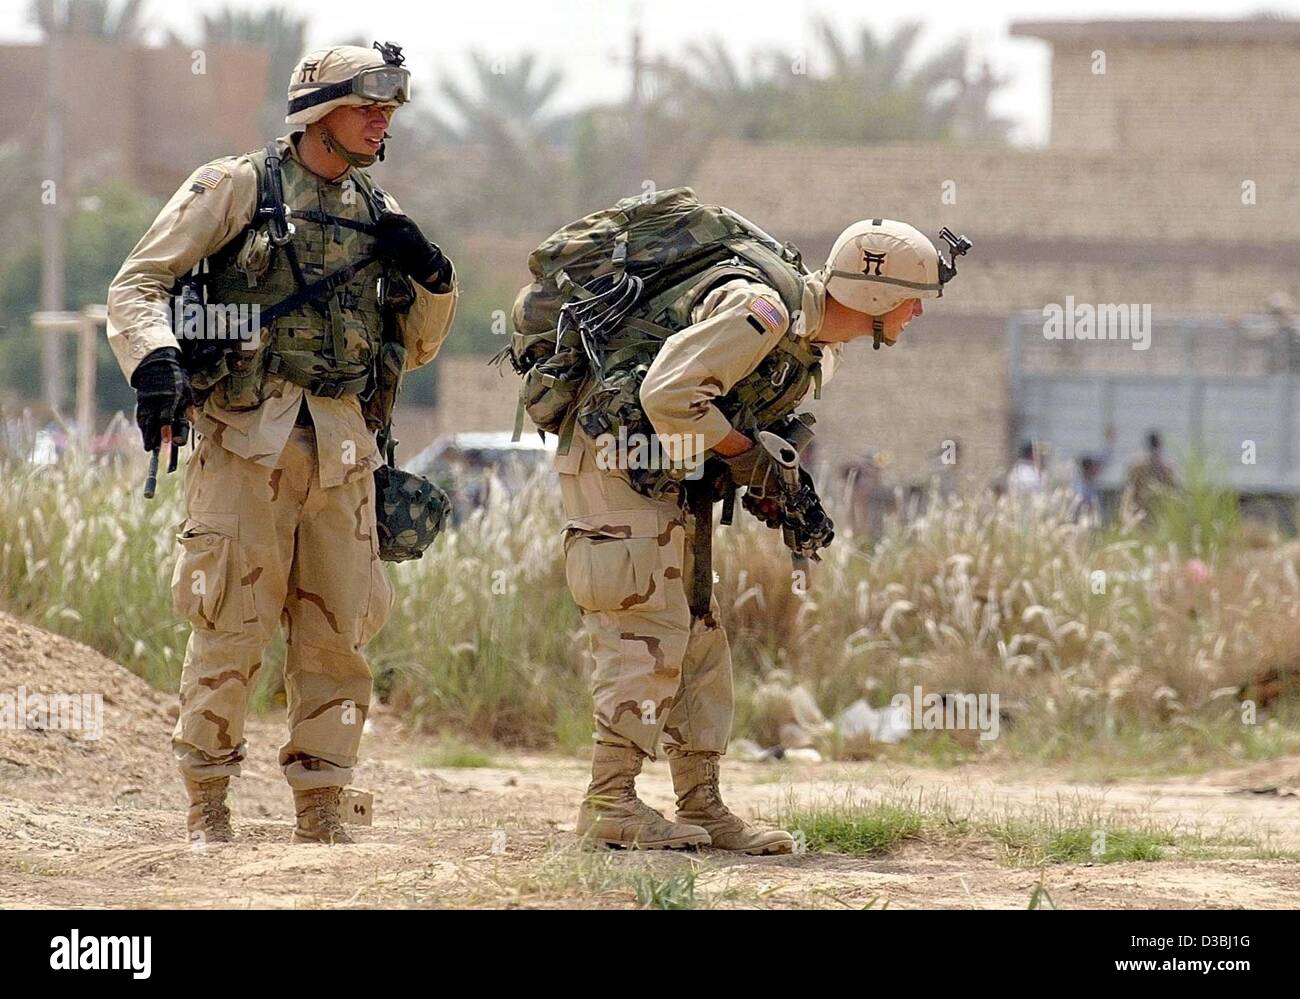 (dpa) - US soldiers search for an unexploded ordnance in a suburb of Baghdad, Iraq's capital, 24 April 2003. Stock Photo